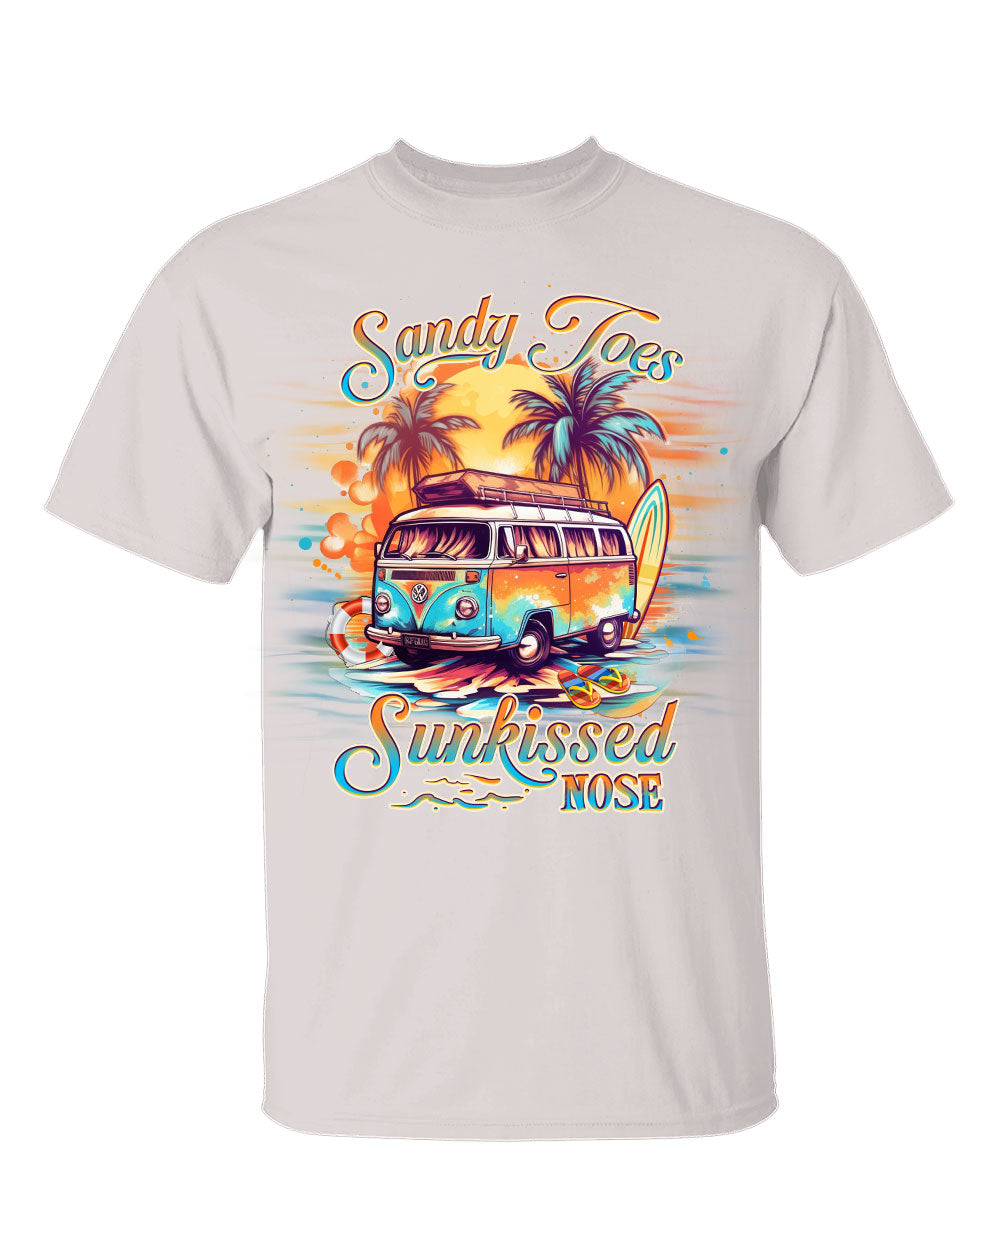 SANDY TOES SUNKISSED NOSE COTTON SHIRT - YHHG2405235